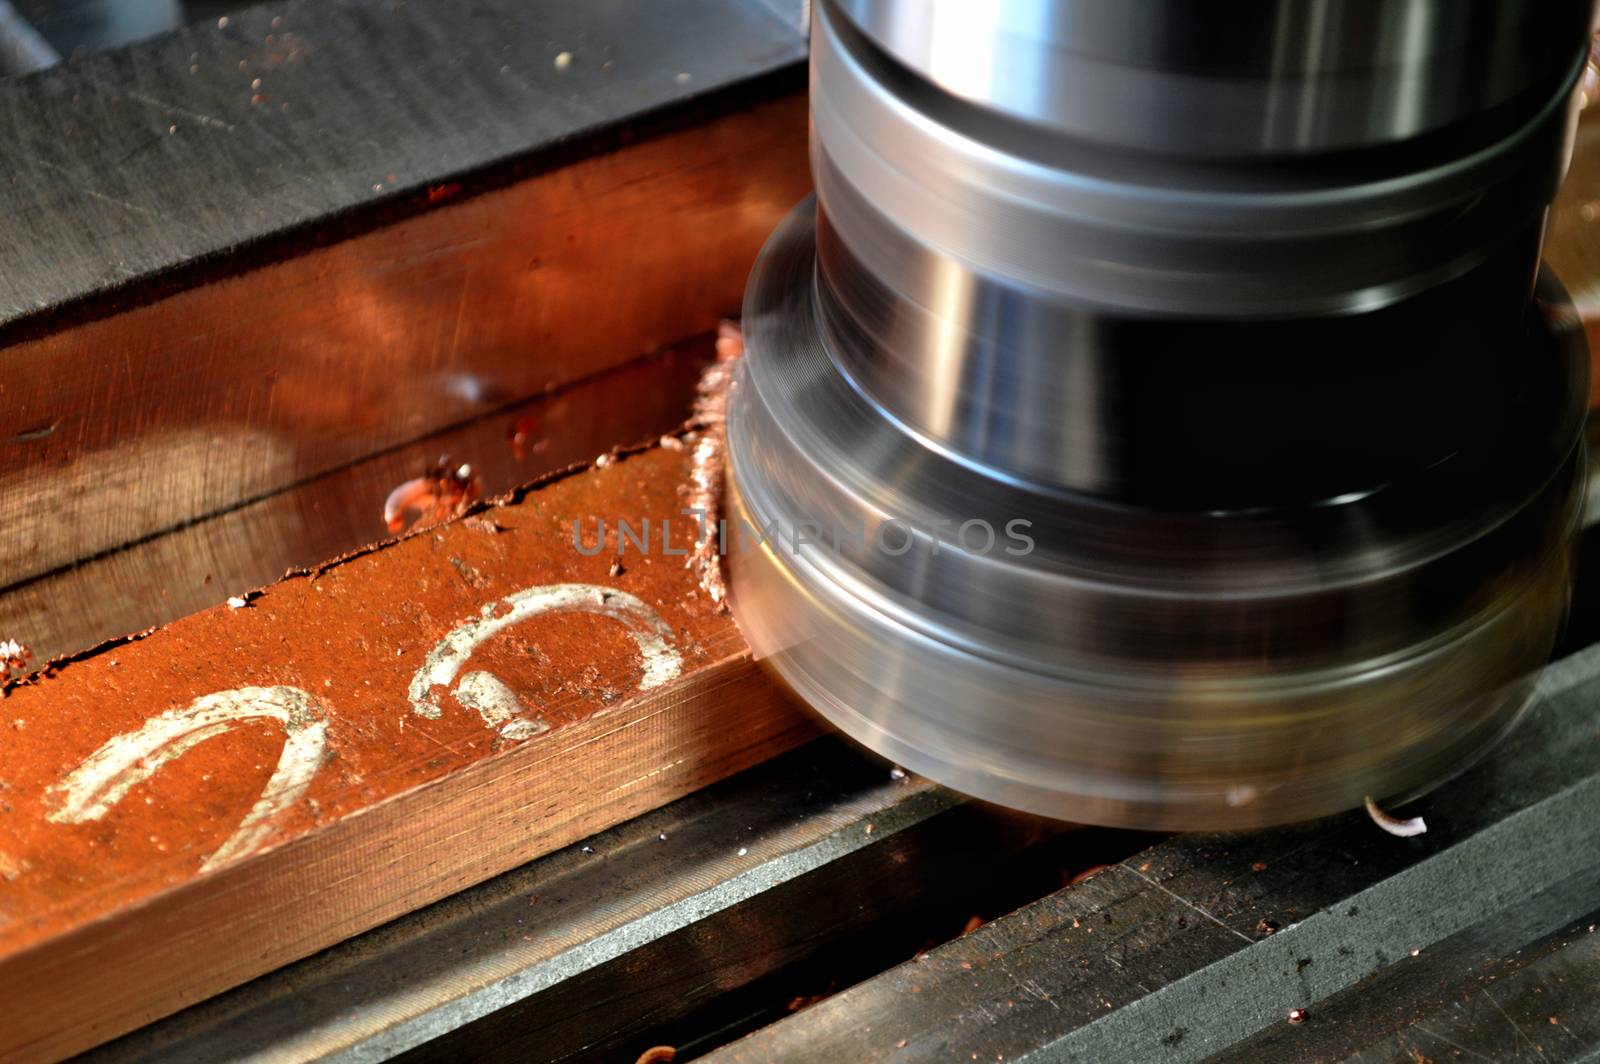 Milling cutter by fxmdk